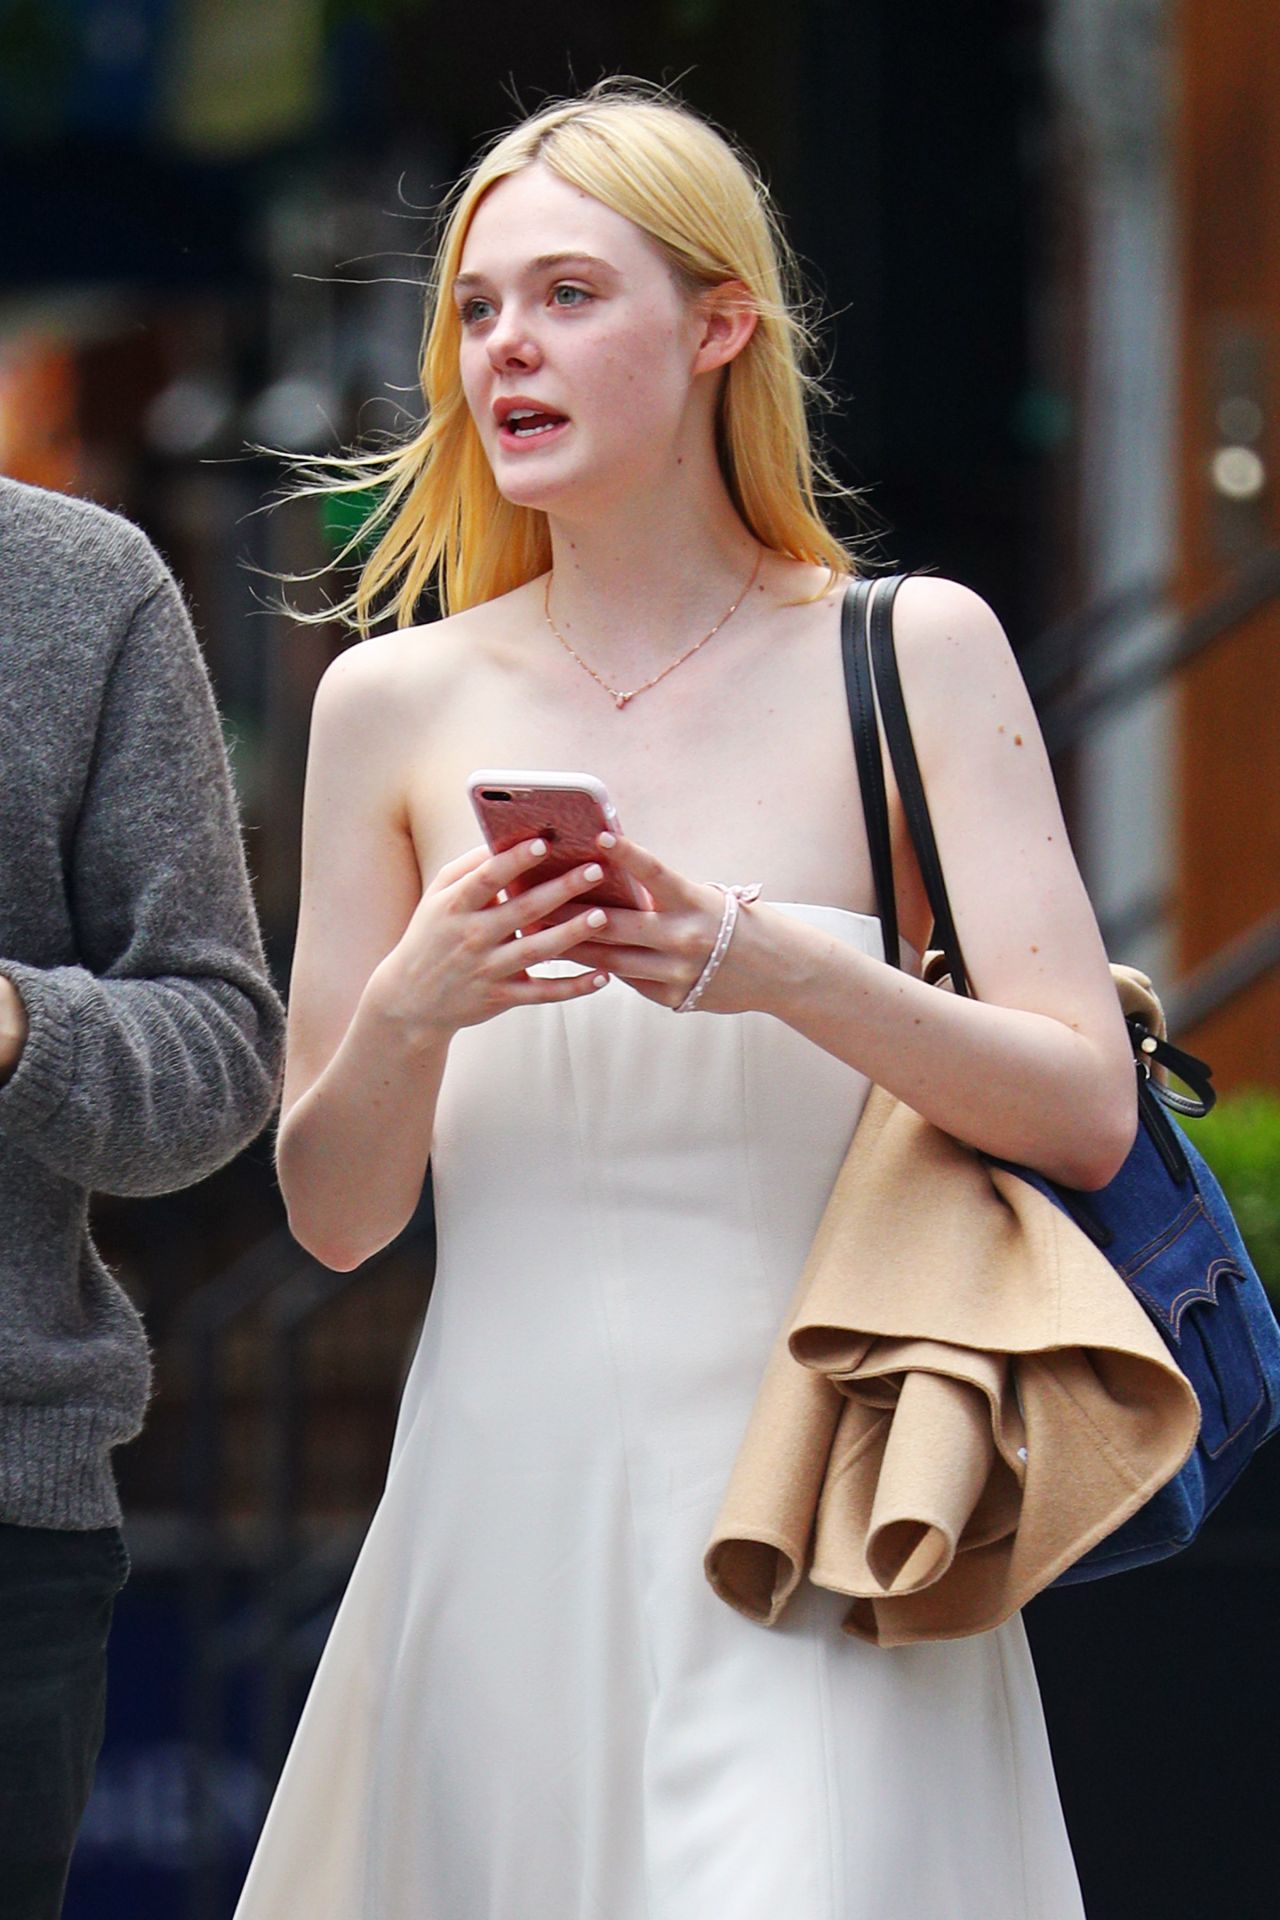 elle-fanning-cute-style-grabs-lunch-with-a-friend-in-nyc-06-02-2017-4.